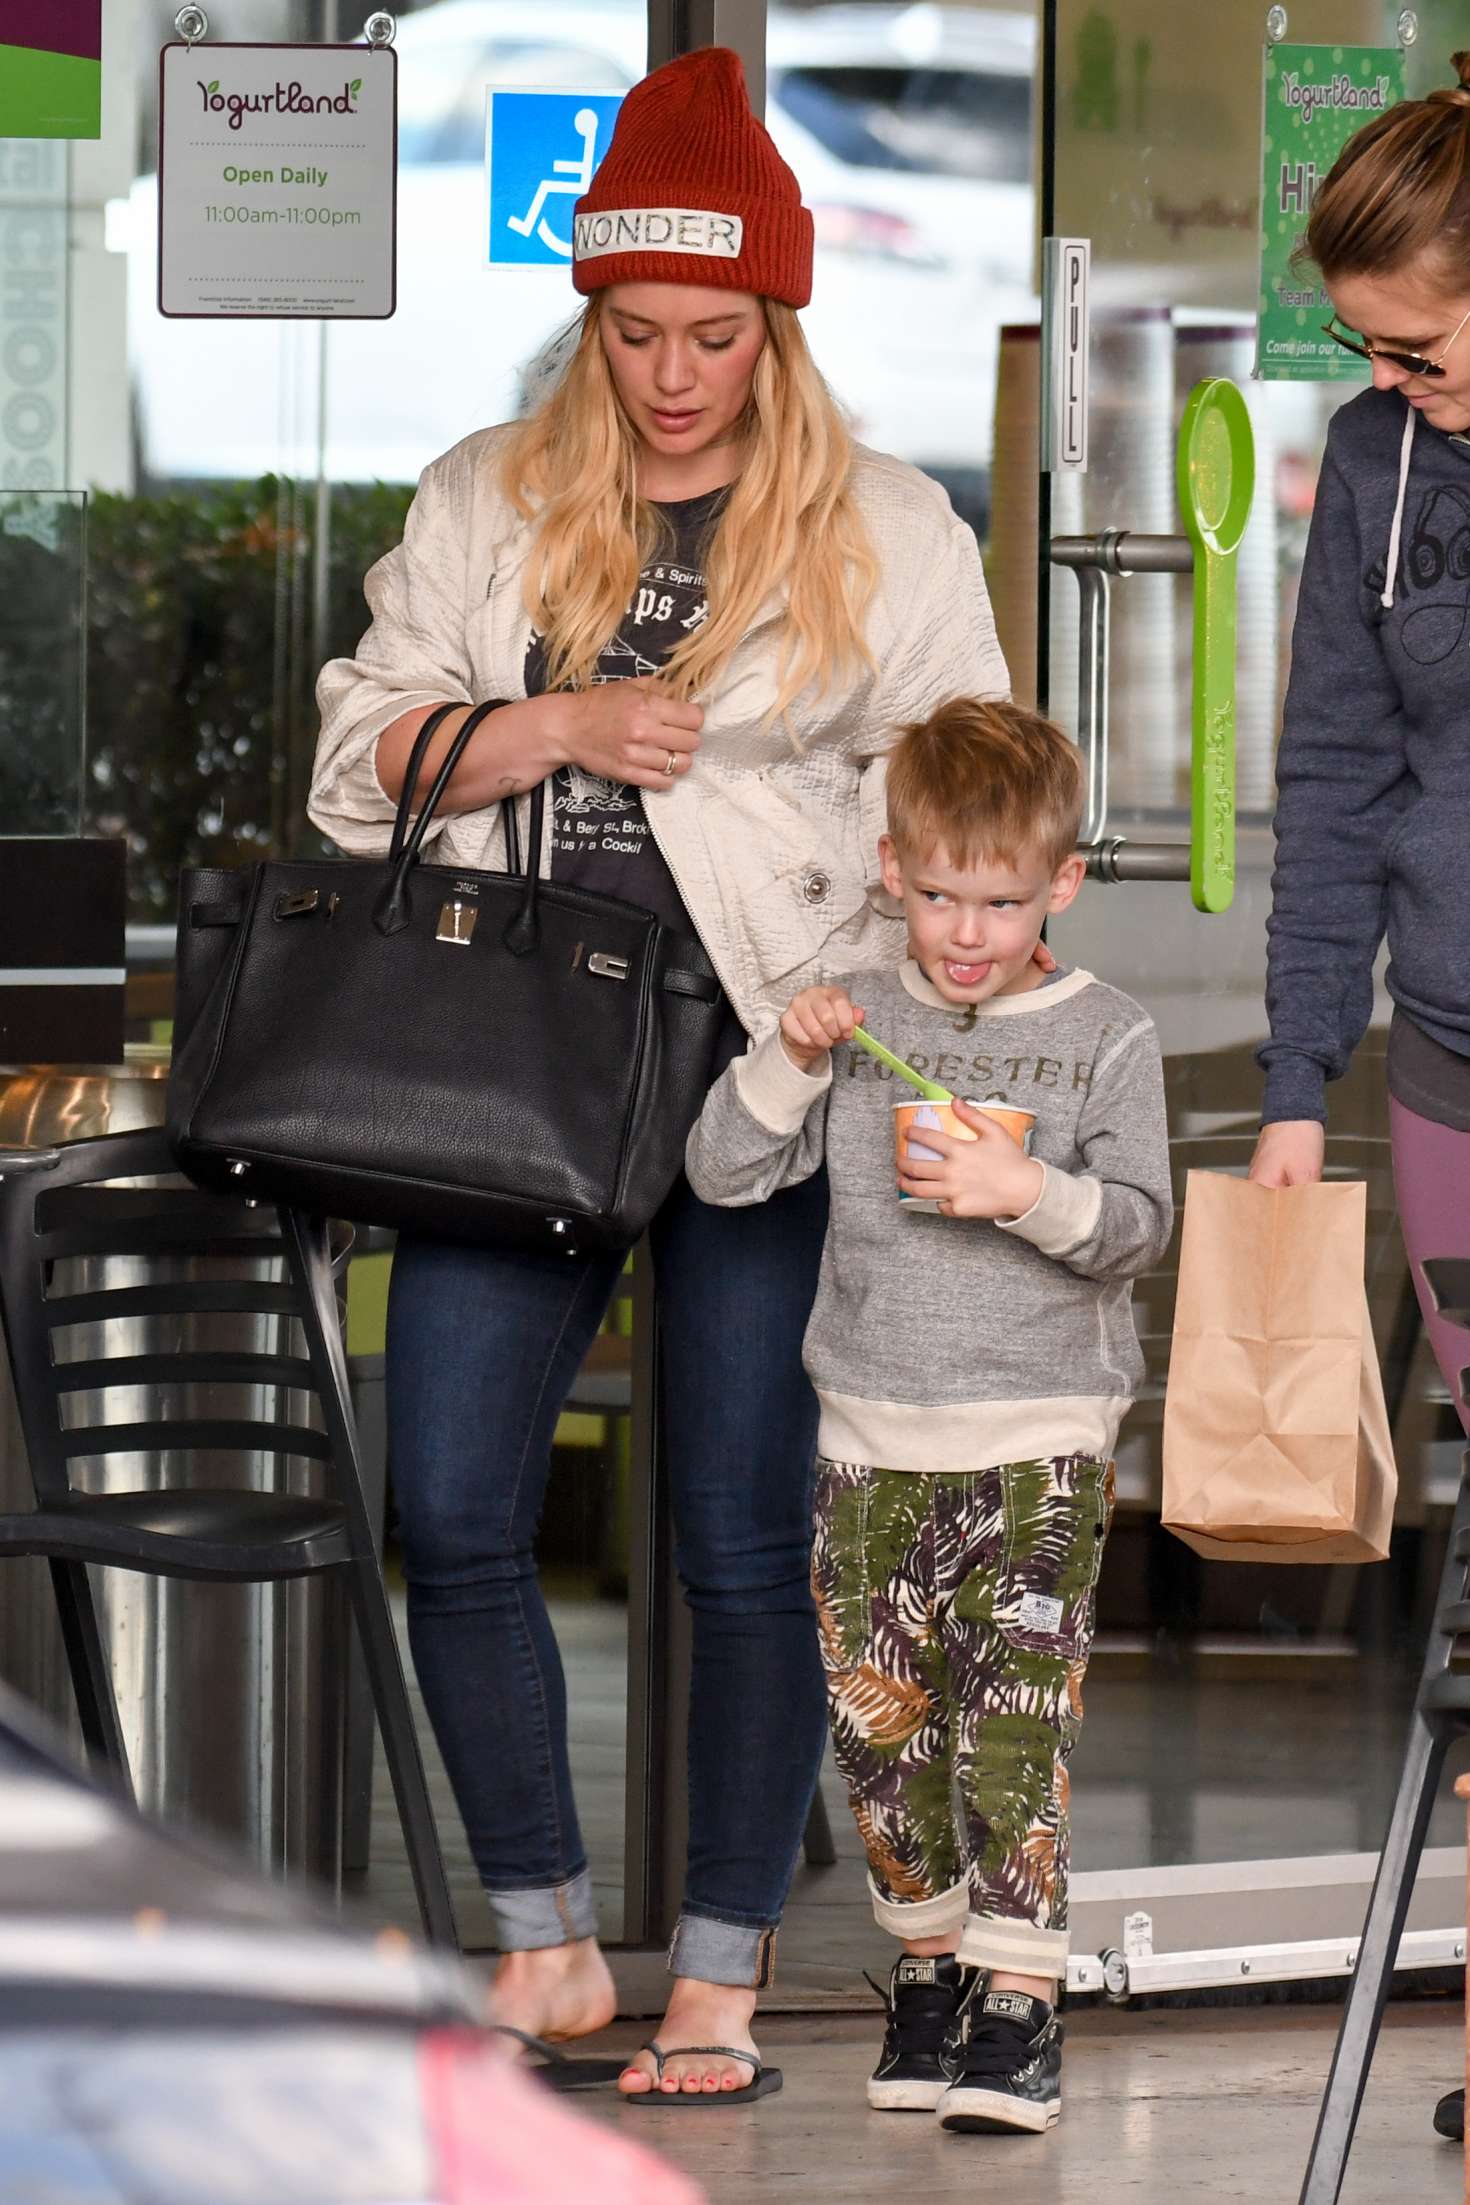 Hilary Duff 2017 : Hilary Duff lunch with her son in Studio City -09